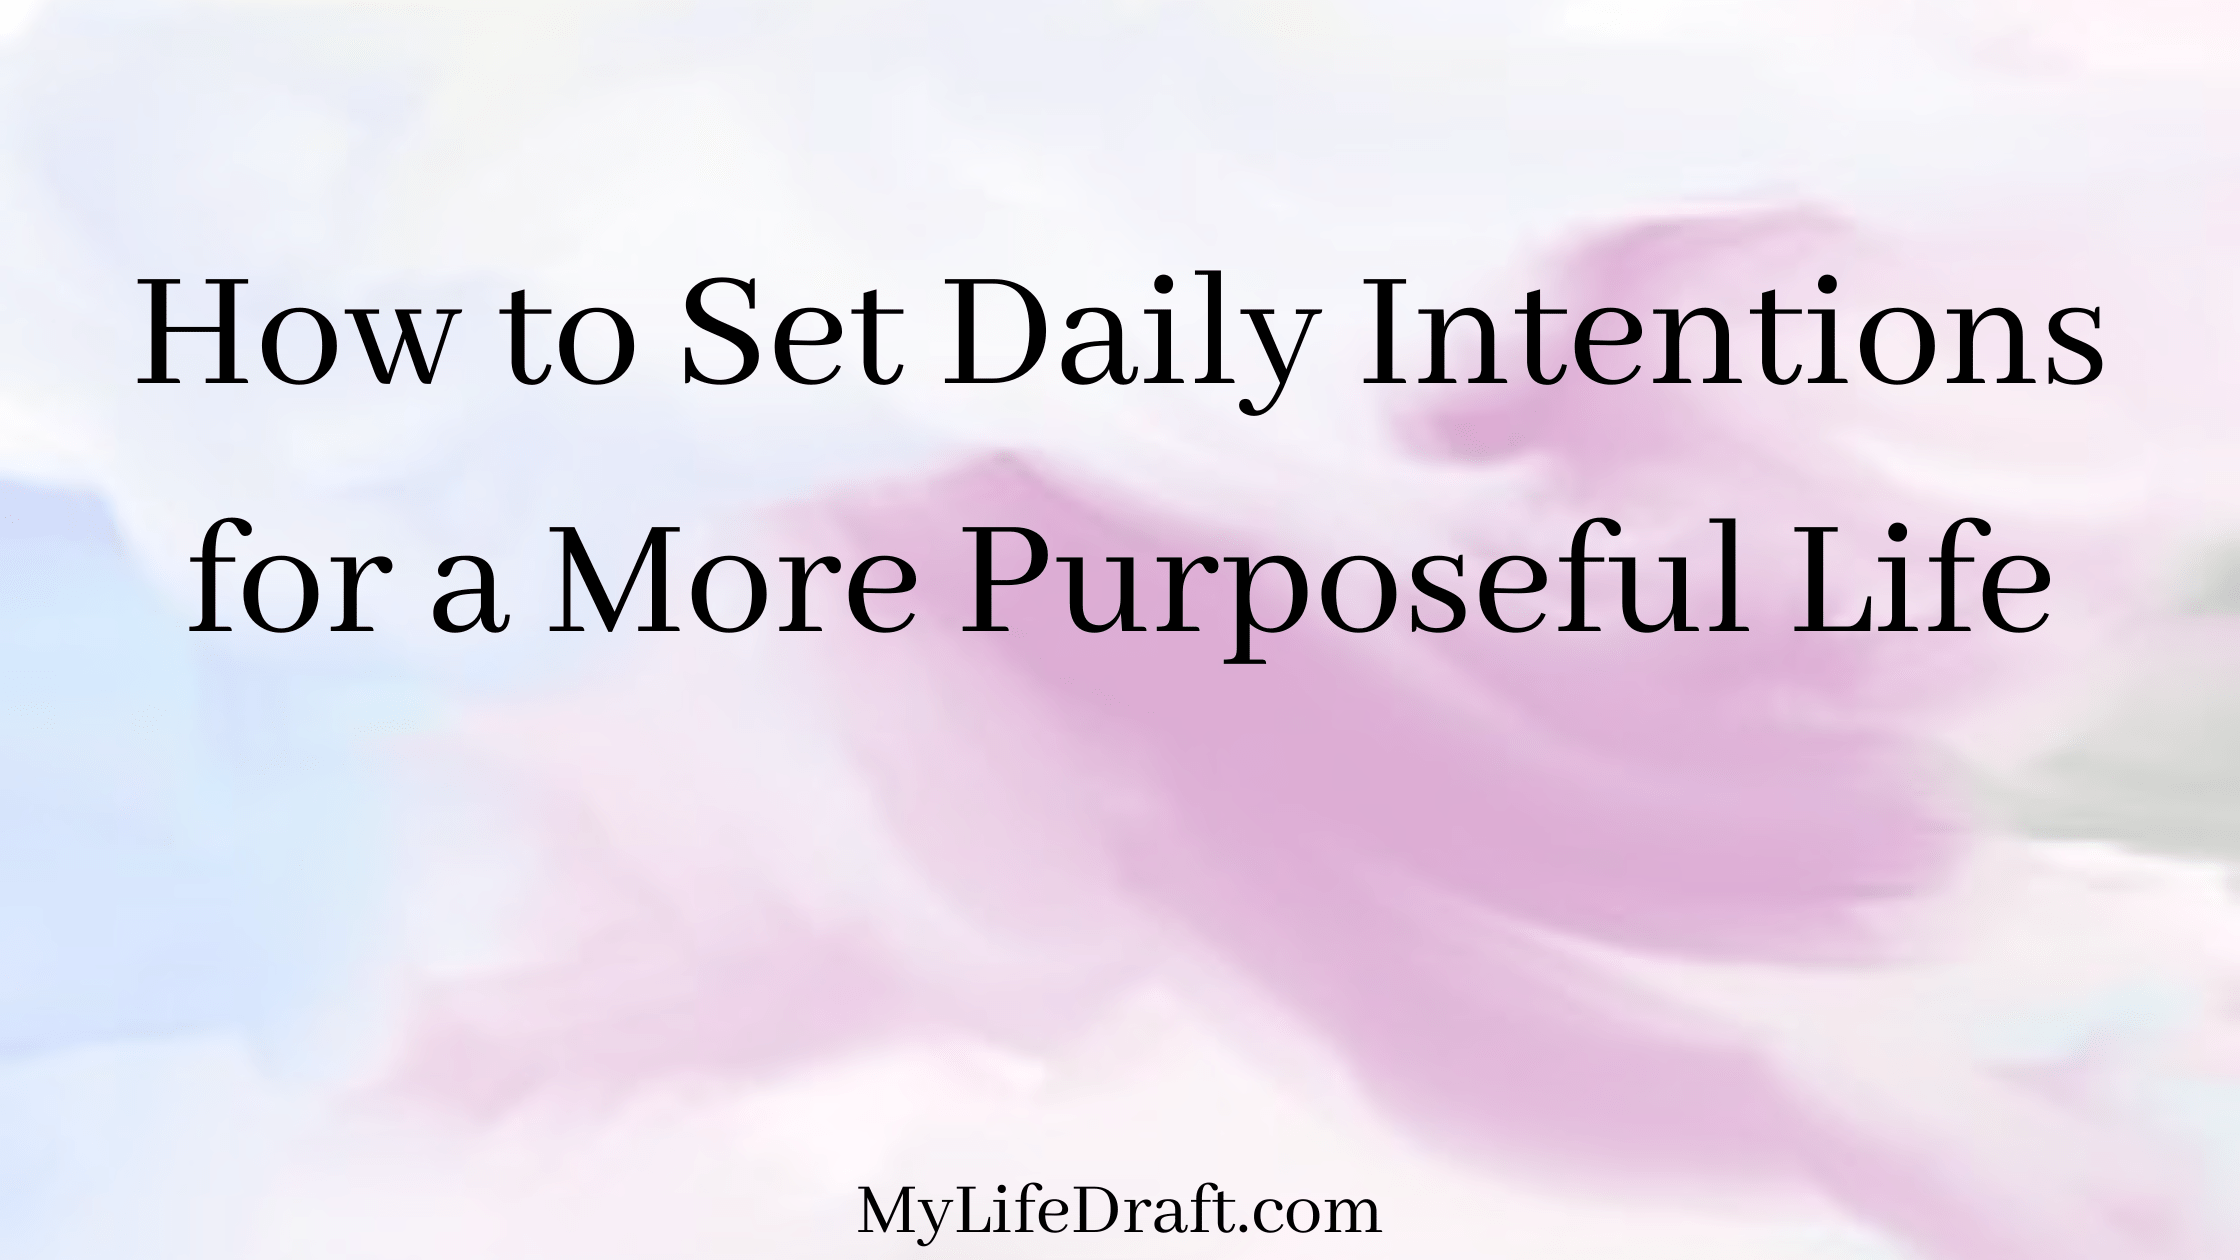 How to Set Daily Intentions for a More Purposeful Life